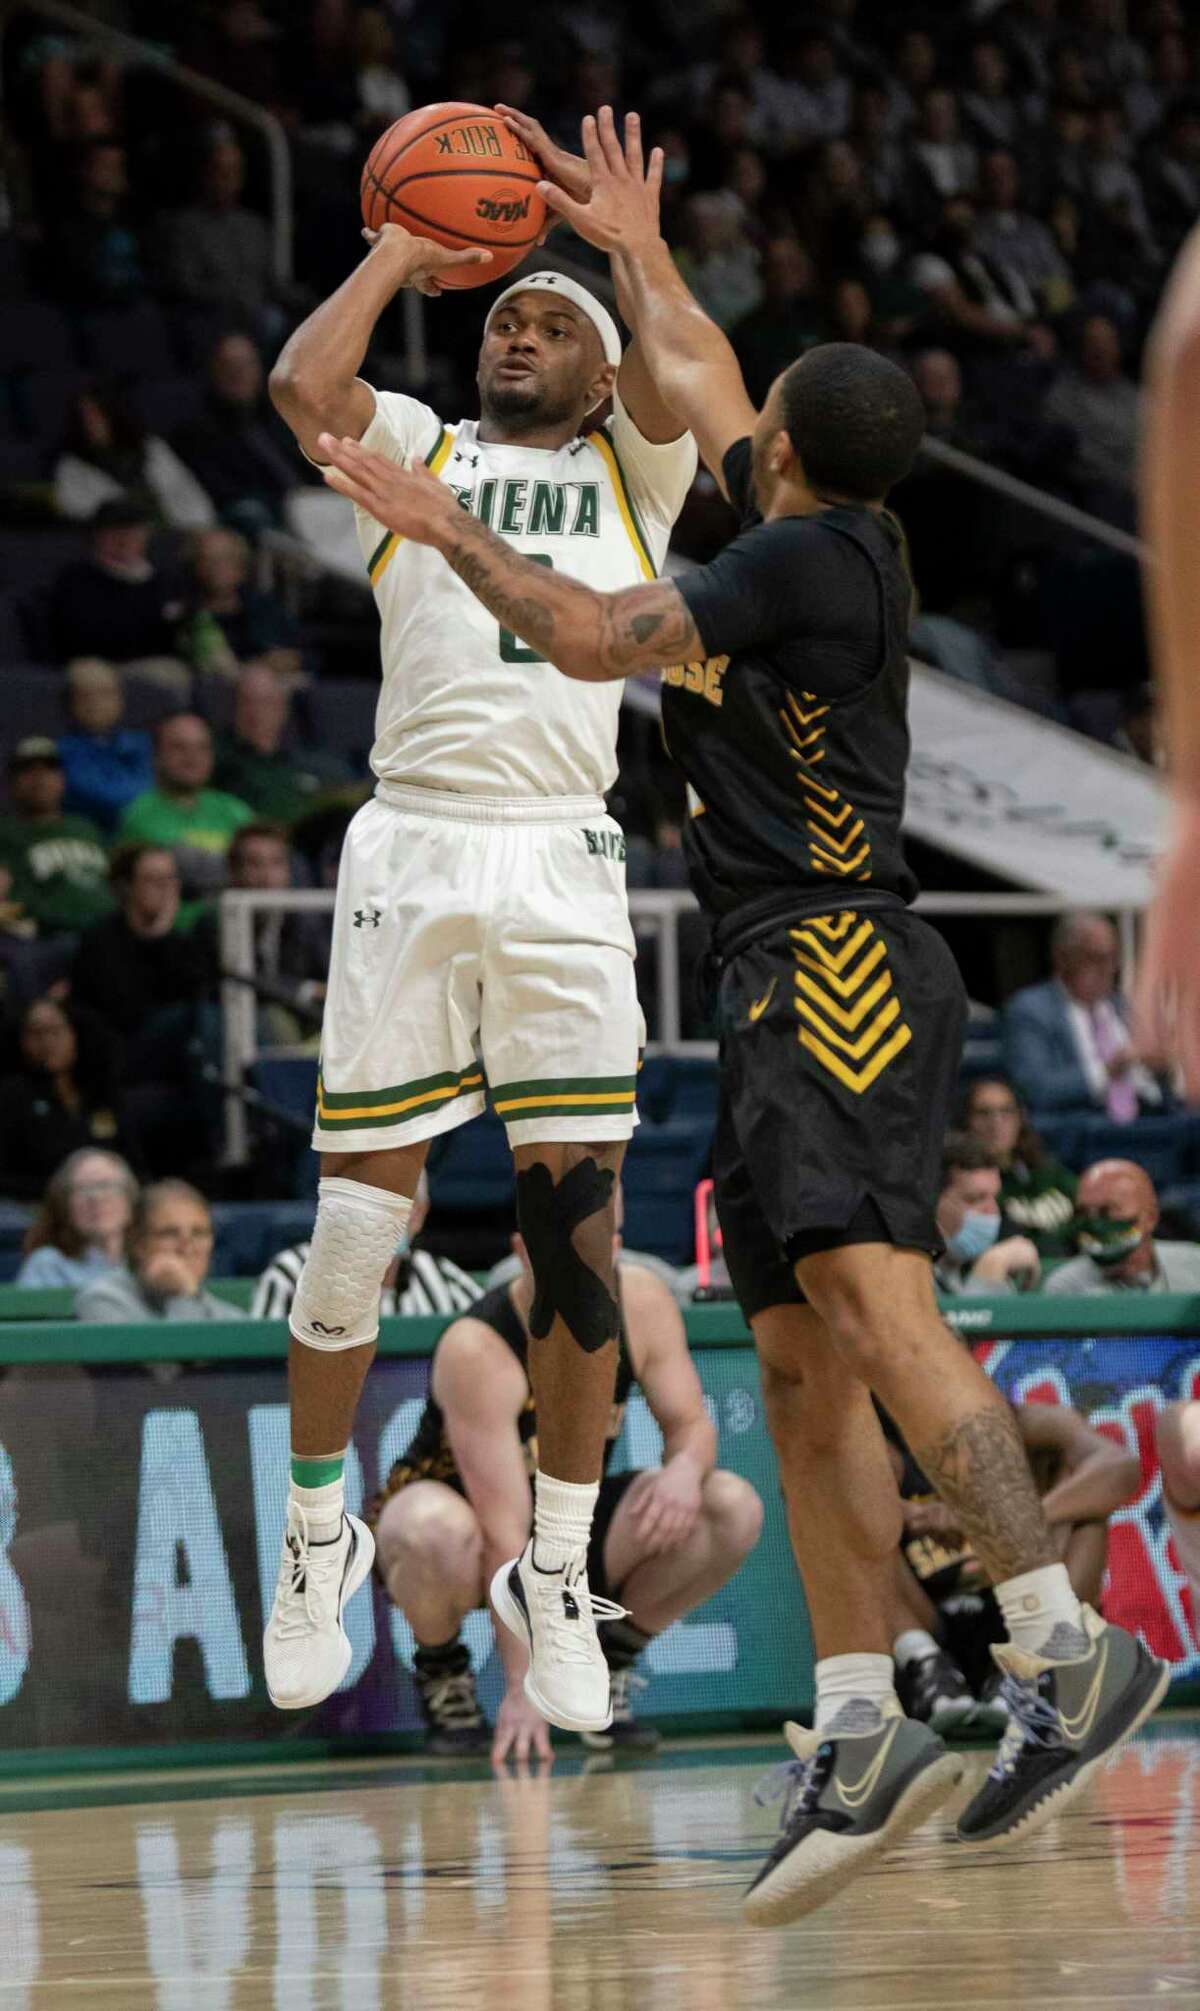 Siena’s Nick Hopkins, shown in an exhibition game against The College of Saint Rose on Oct. 25, said he is looking forward to having the home crowd provide a great atmosphere for the Saints' home opener.